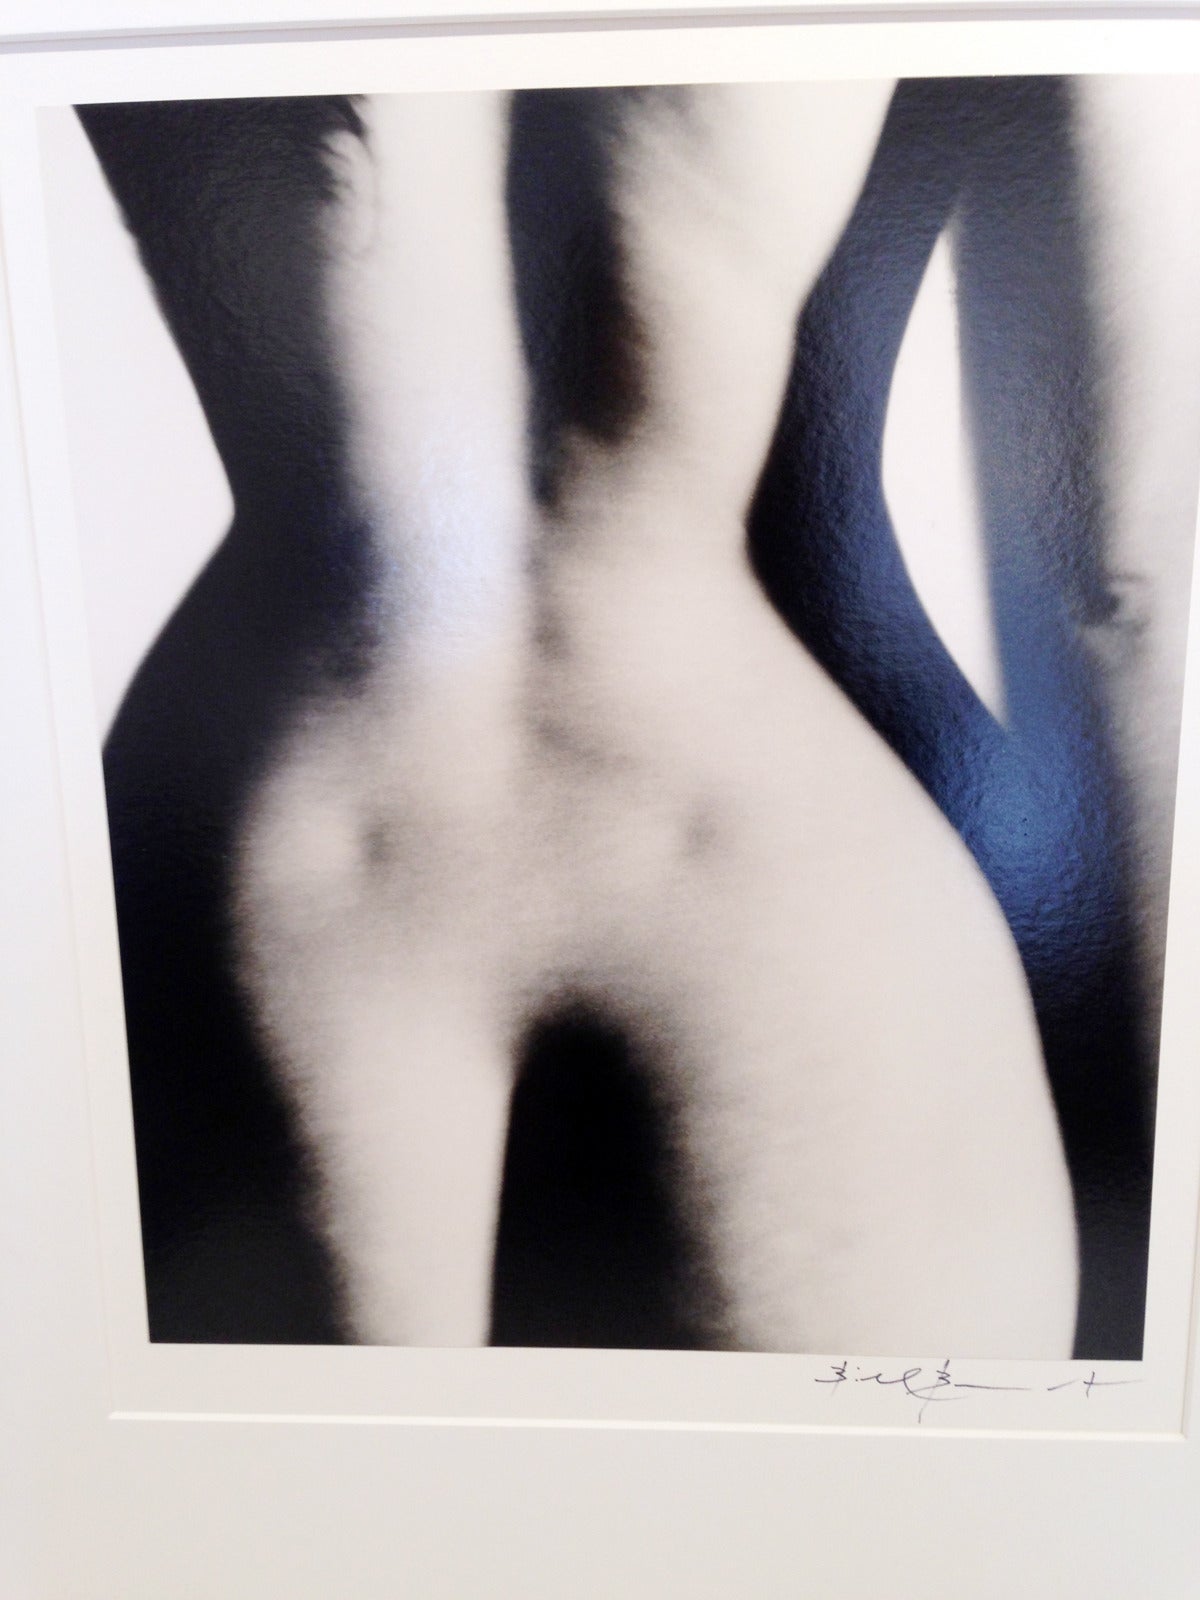 Nude, London - Photograph by Bill Brandt